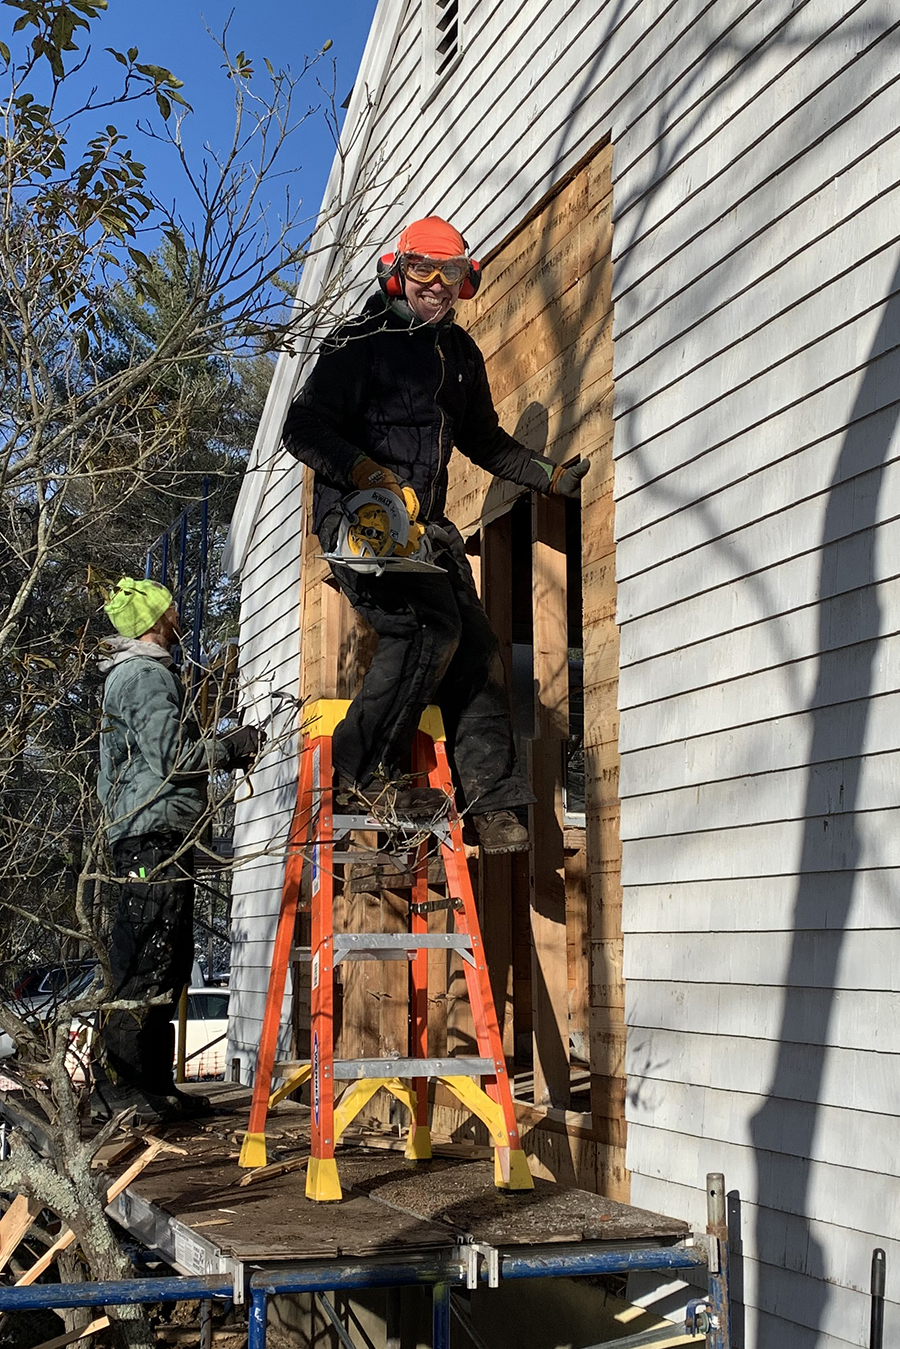 Jason McKenzie working on the side of a house